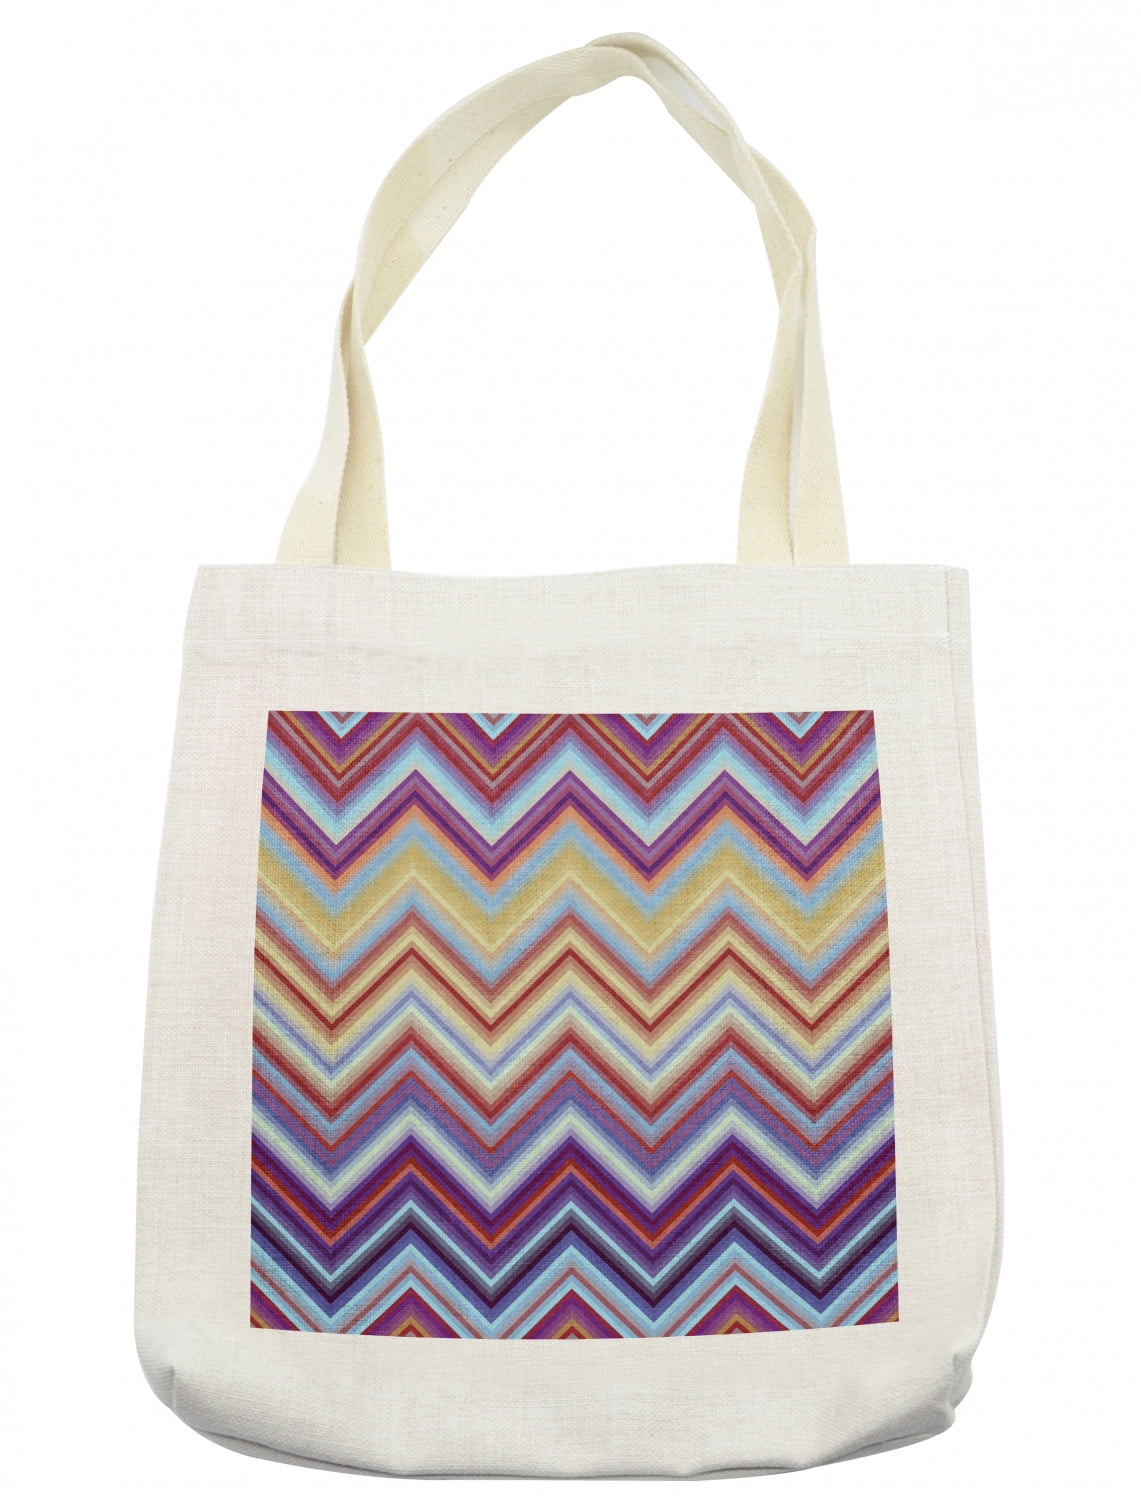 Details about   STAGE Shopping Bag Chevron Graphic Design Reusable Tote Bag 16X20" 